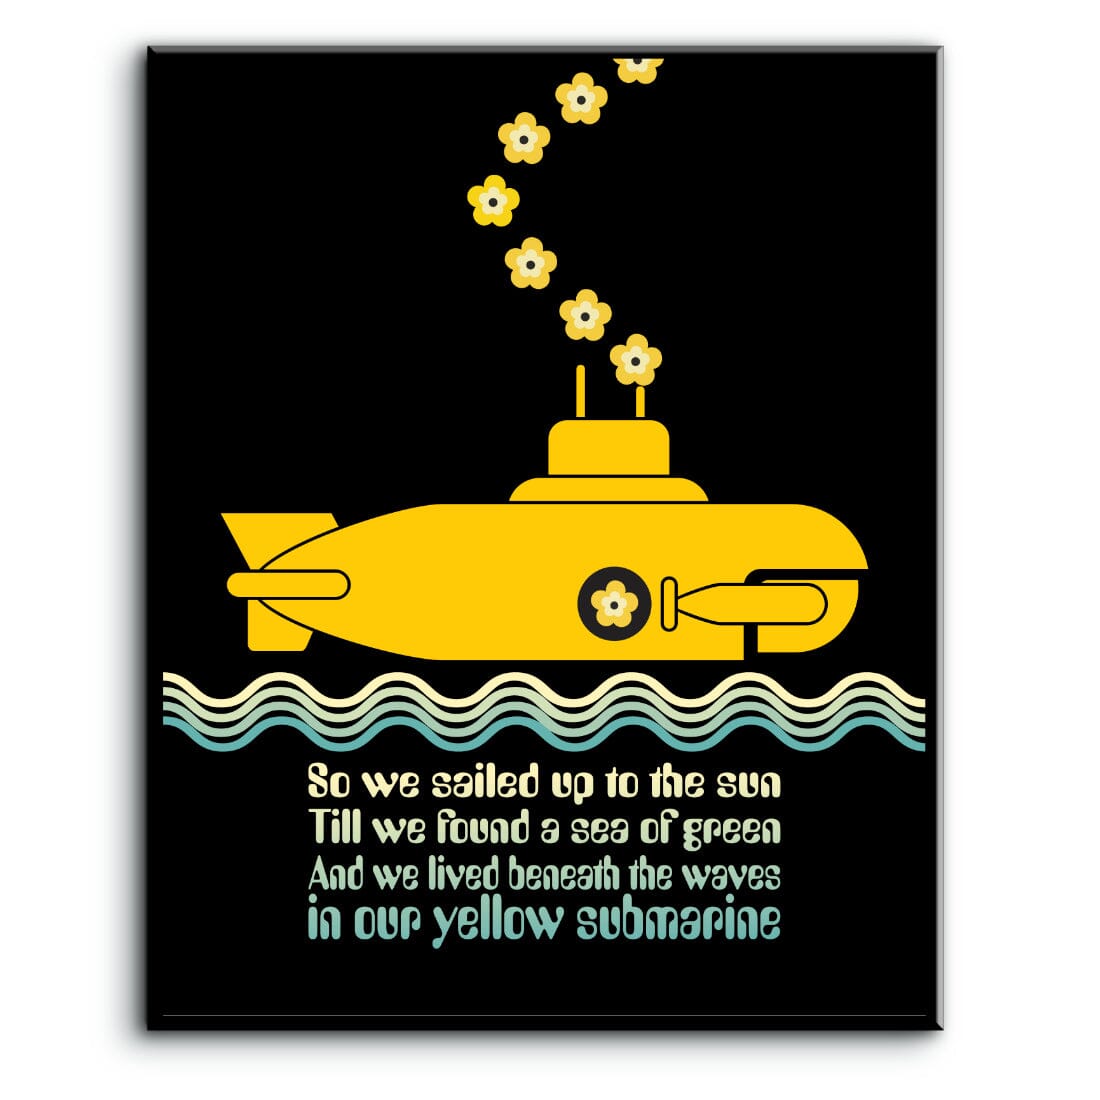 Yellow Submarine by the Beatles - Print Song Lyric Music Art Song Lyrics Art Song Lyrics Art 8x10 Plaque Mount 